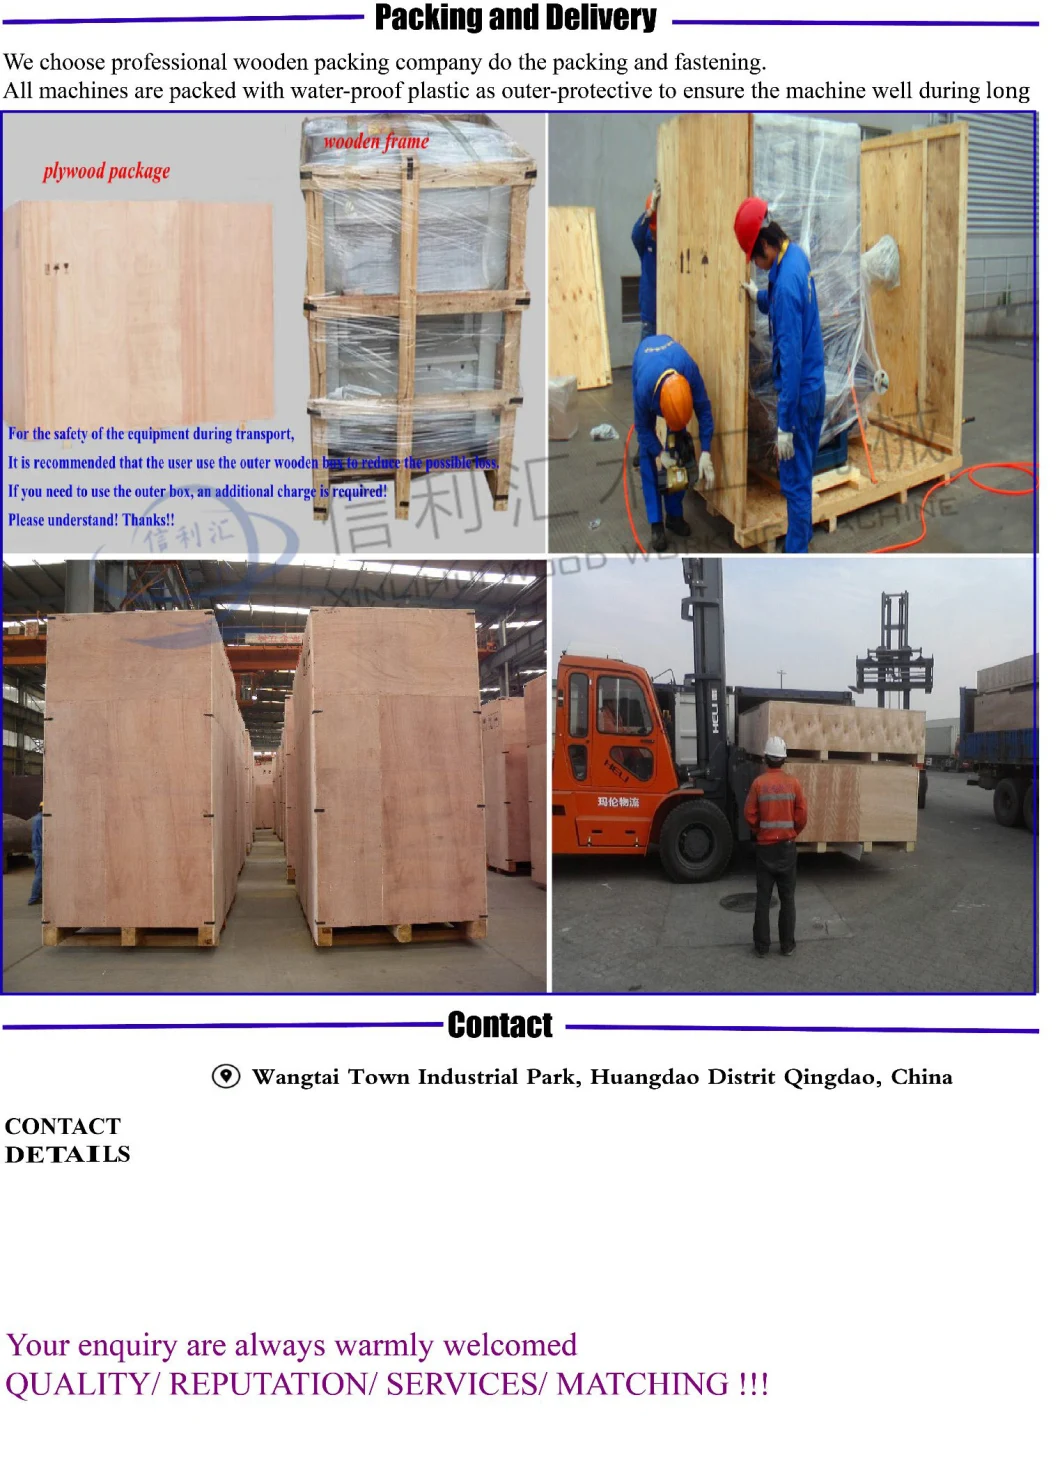 Easy and Small Radial Arm Saw Woodworking Machine/ Radial Saw/ Heavy Duty Radial Arm Saw/ Arm Saw Cutting Machine for Wooden Arm Saw Cutting Machine for Wooden